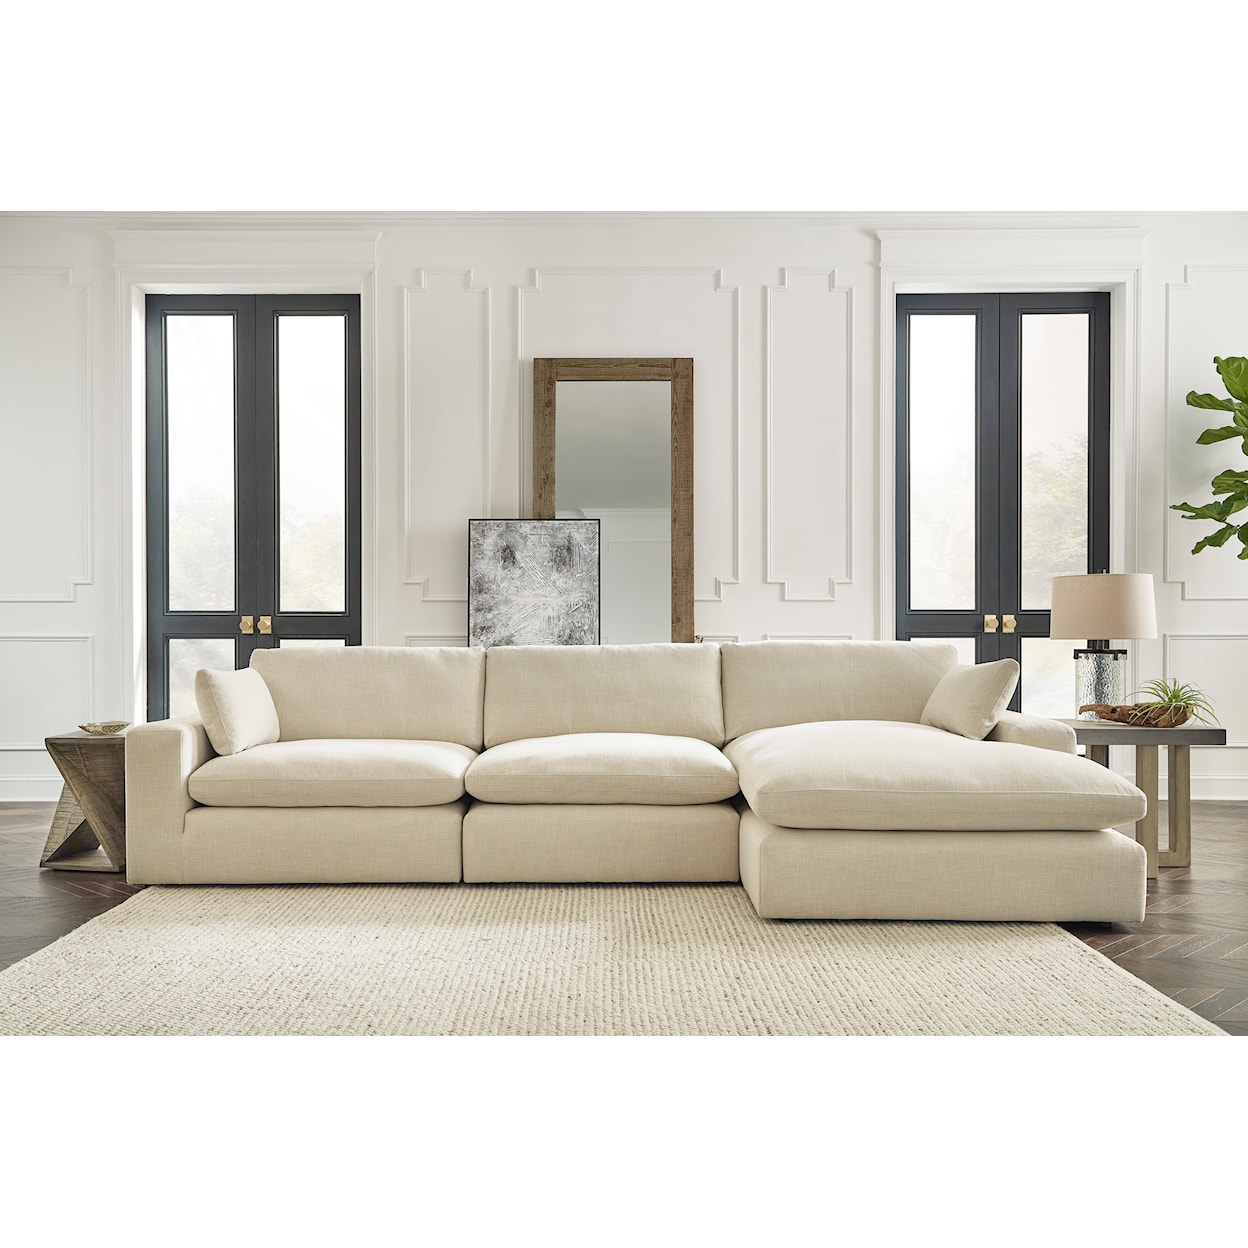 JB King Elyza 3-Piece Modular Sectional with Chaise